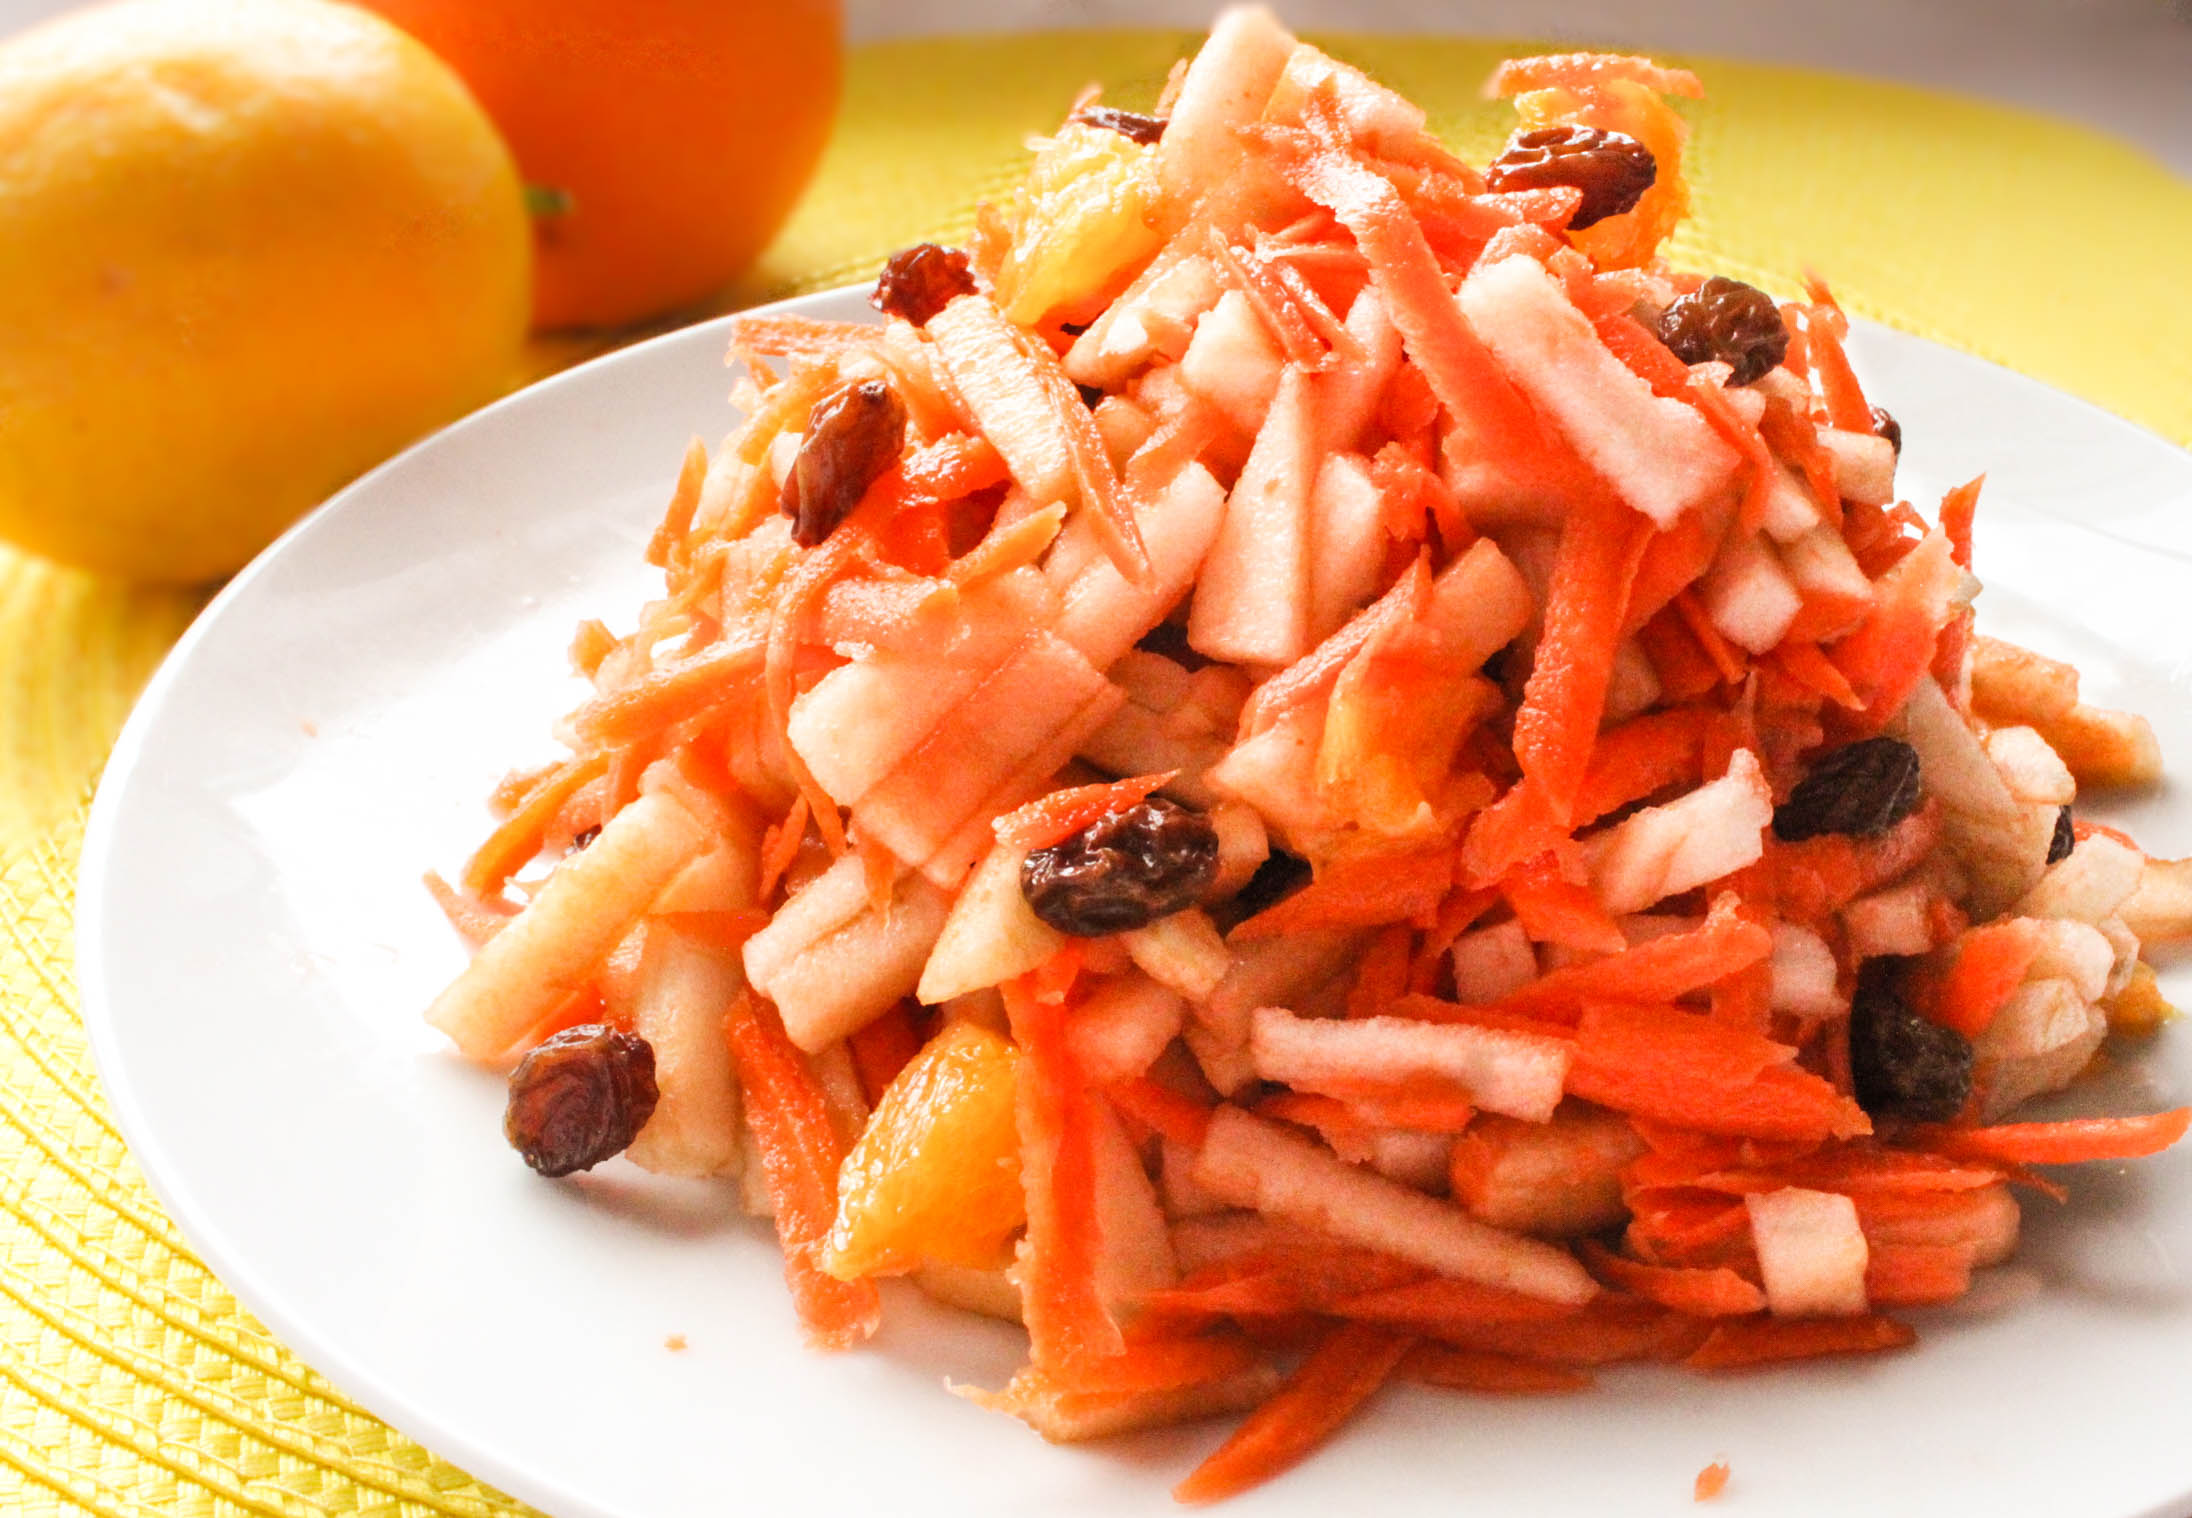 Carrot Salad with Apples and Raisins - tasty, colorful, healthy and easy to make.